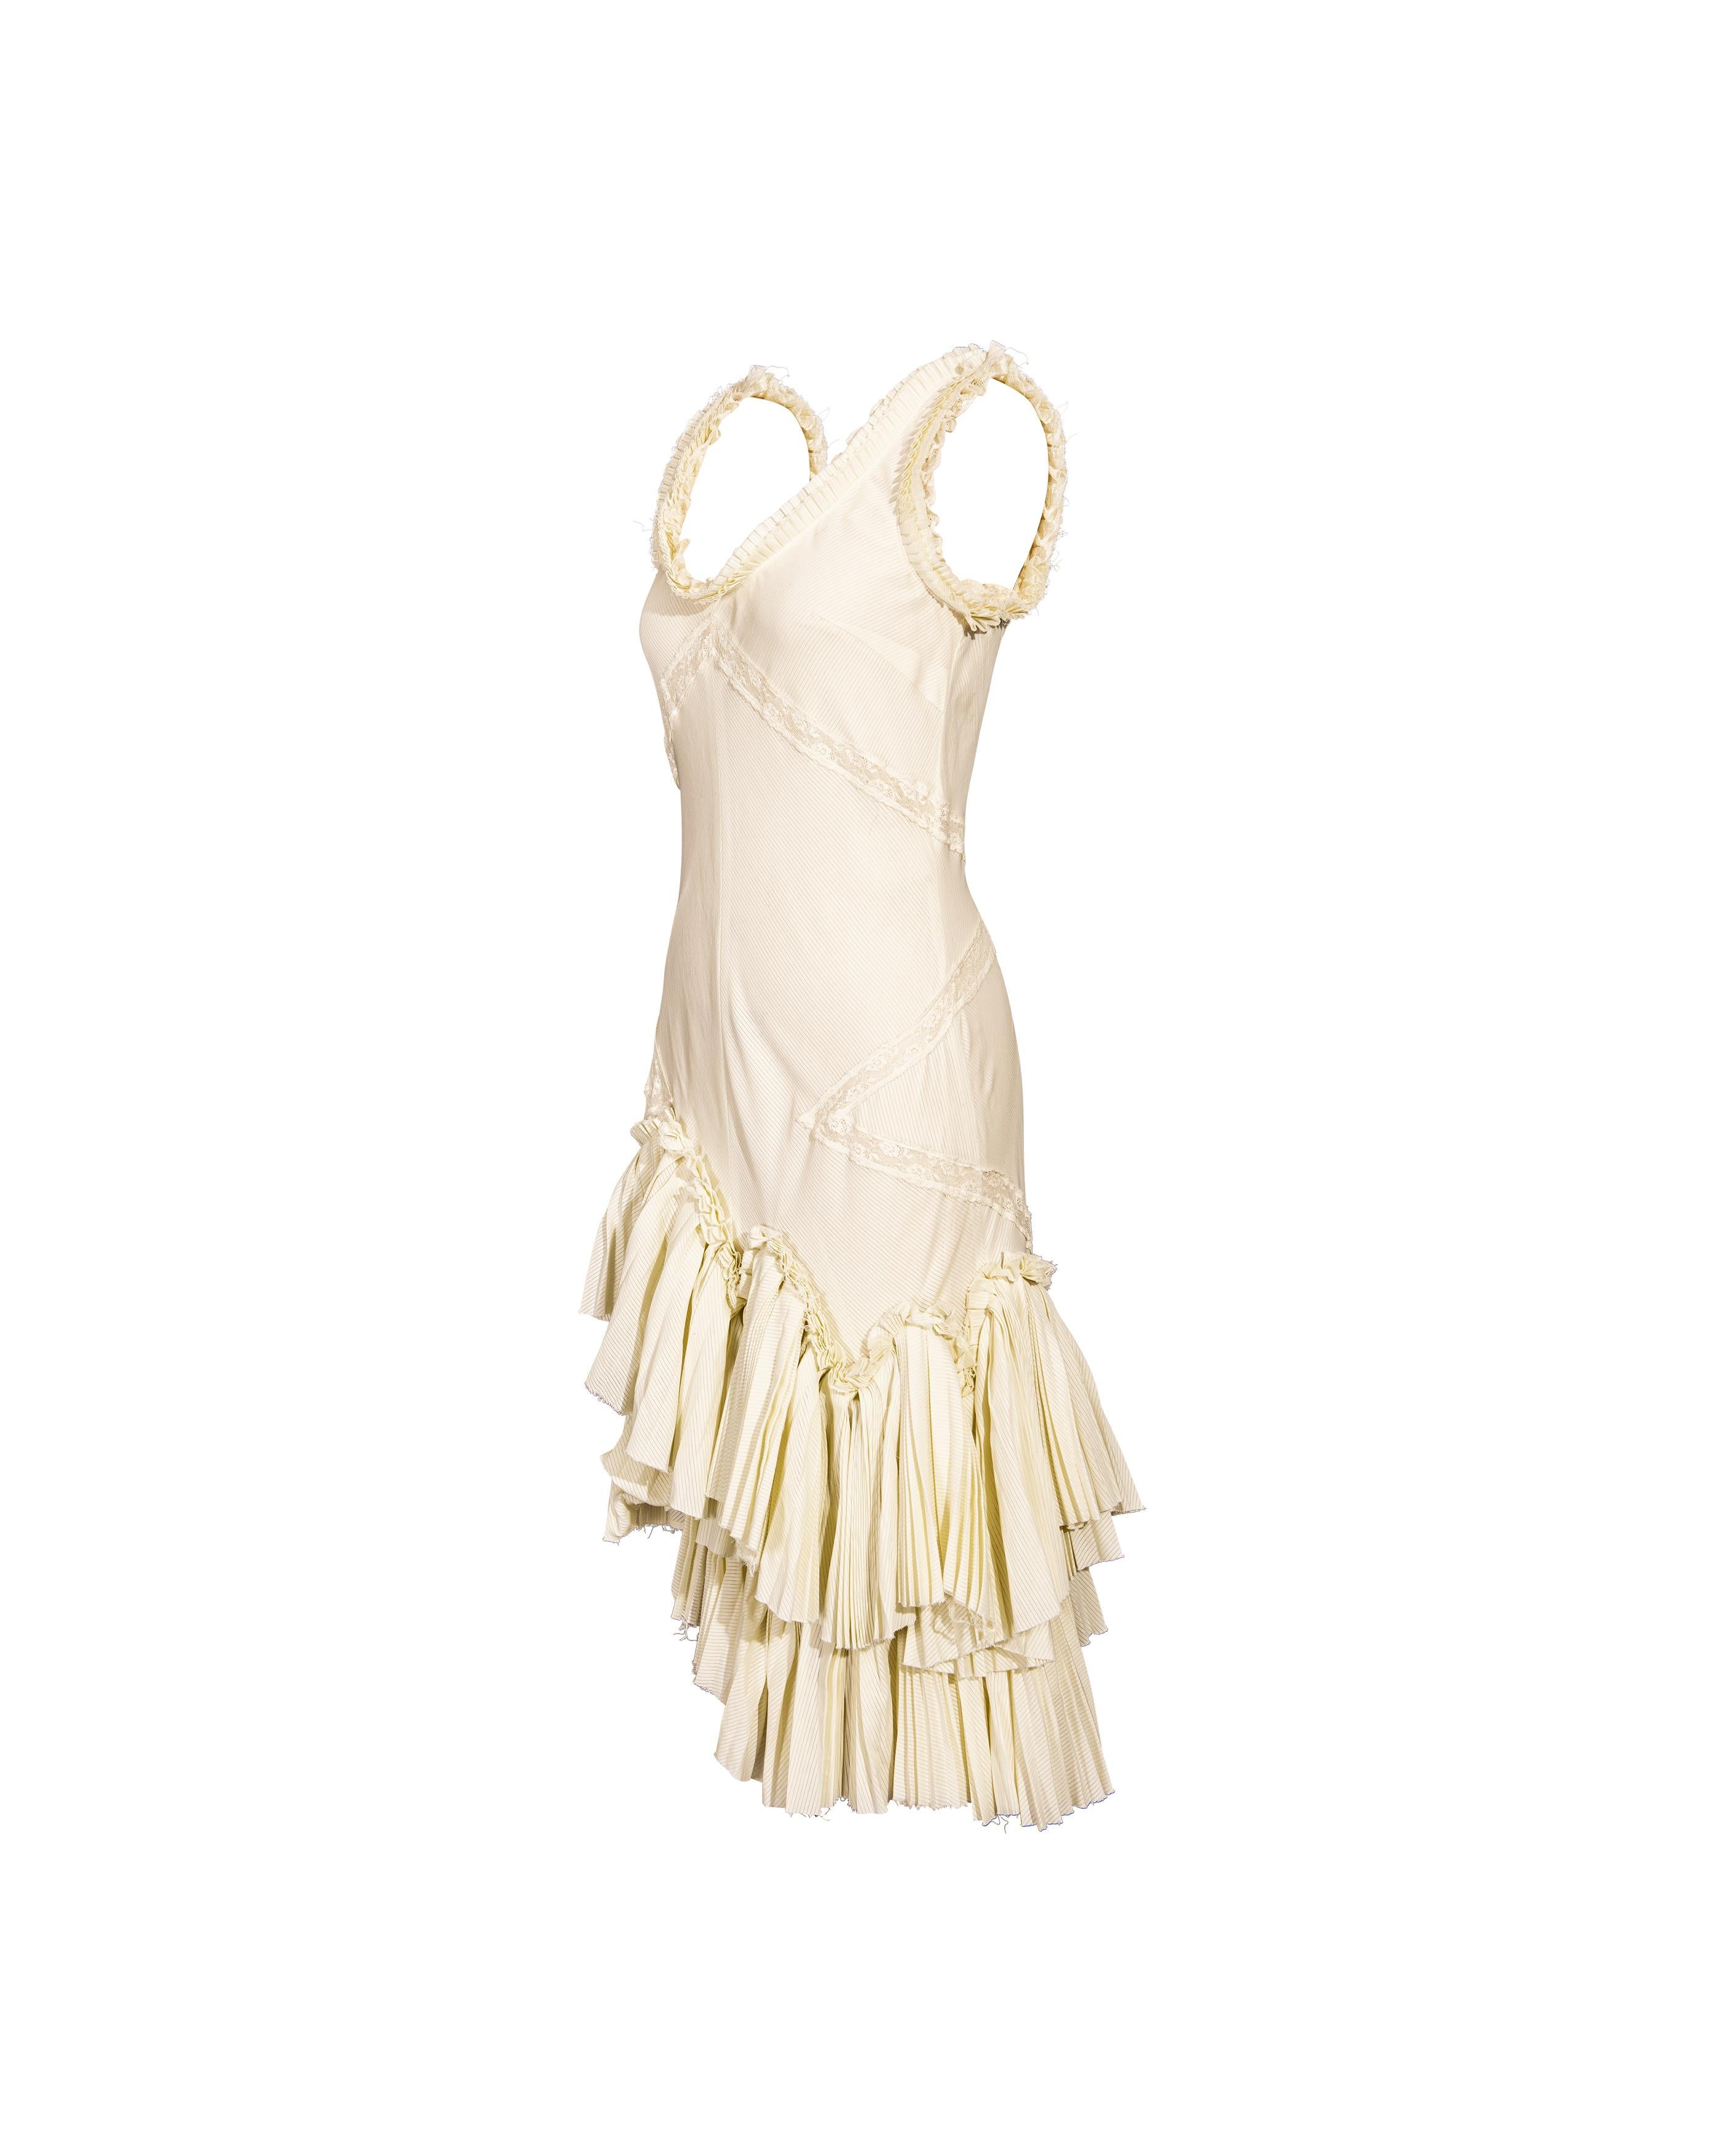 S/S 2005 Alexander McQueen (Lifetime) Pale Yellow Pleated and Lace Cotton Dress In Excellent Condition In North Hollywood, CA